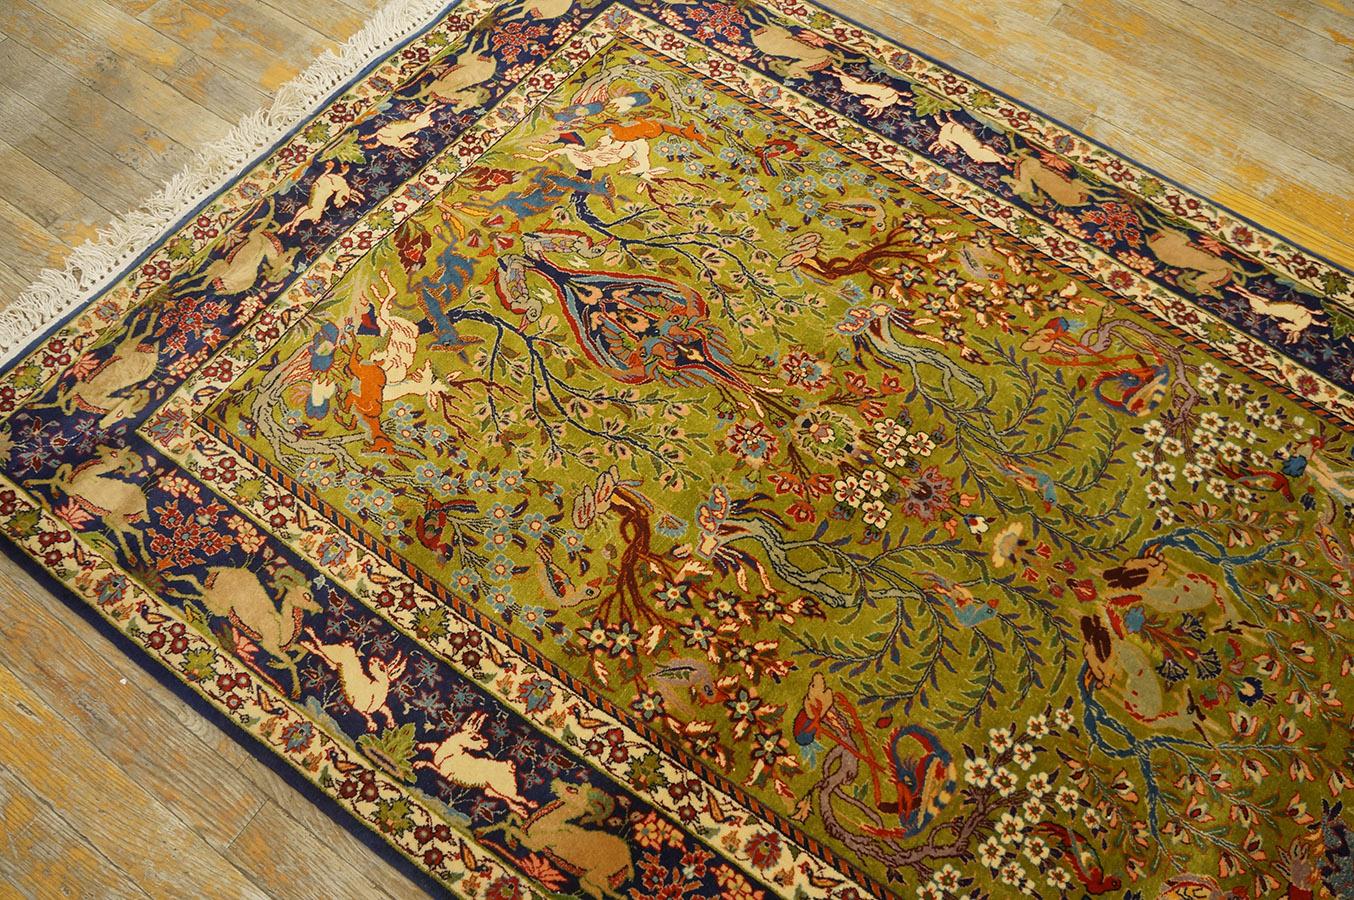 Mid 20th Century Persian Isfahan Carpet ( 3' 6'' x 5' 4'' - 107 x 163 cm) For Sale 8